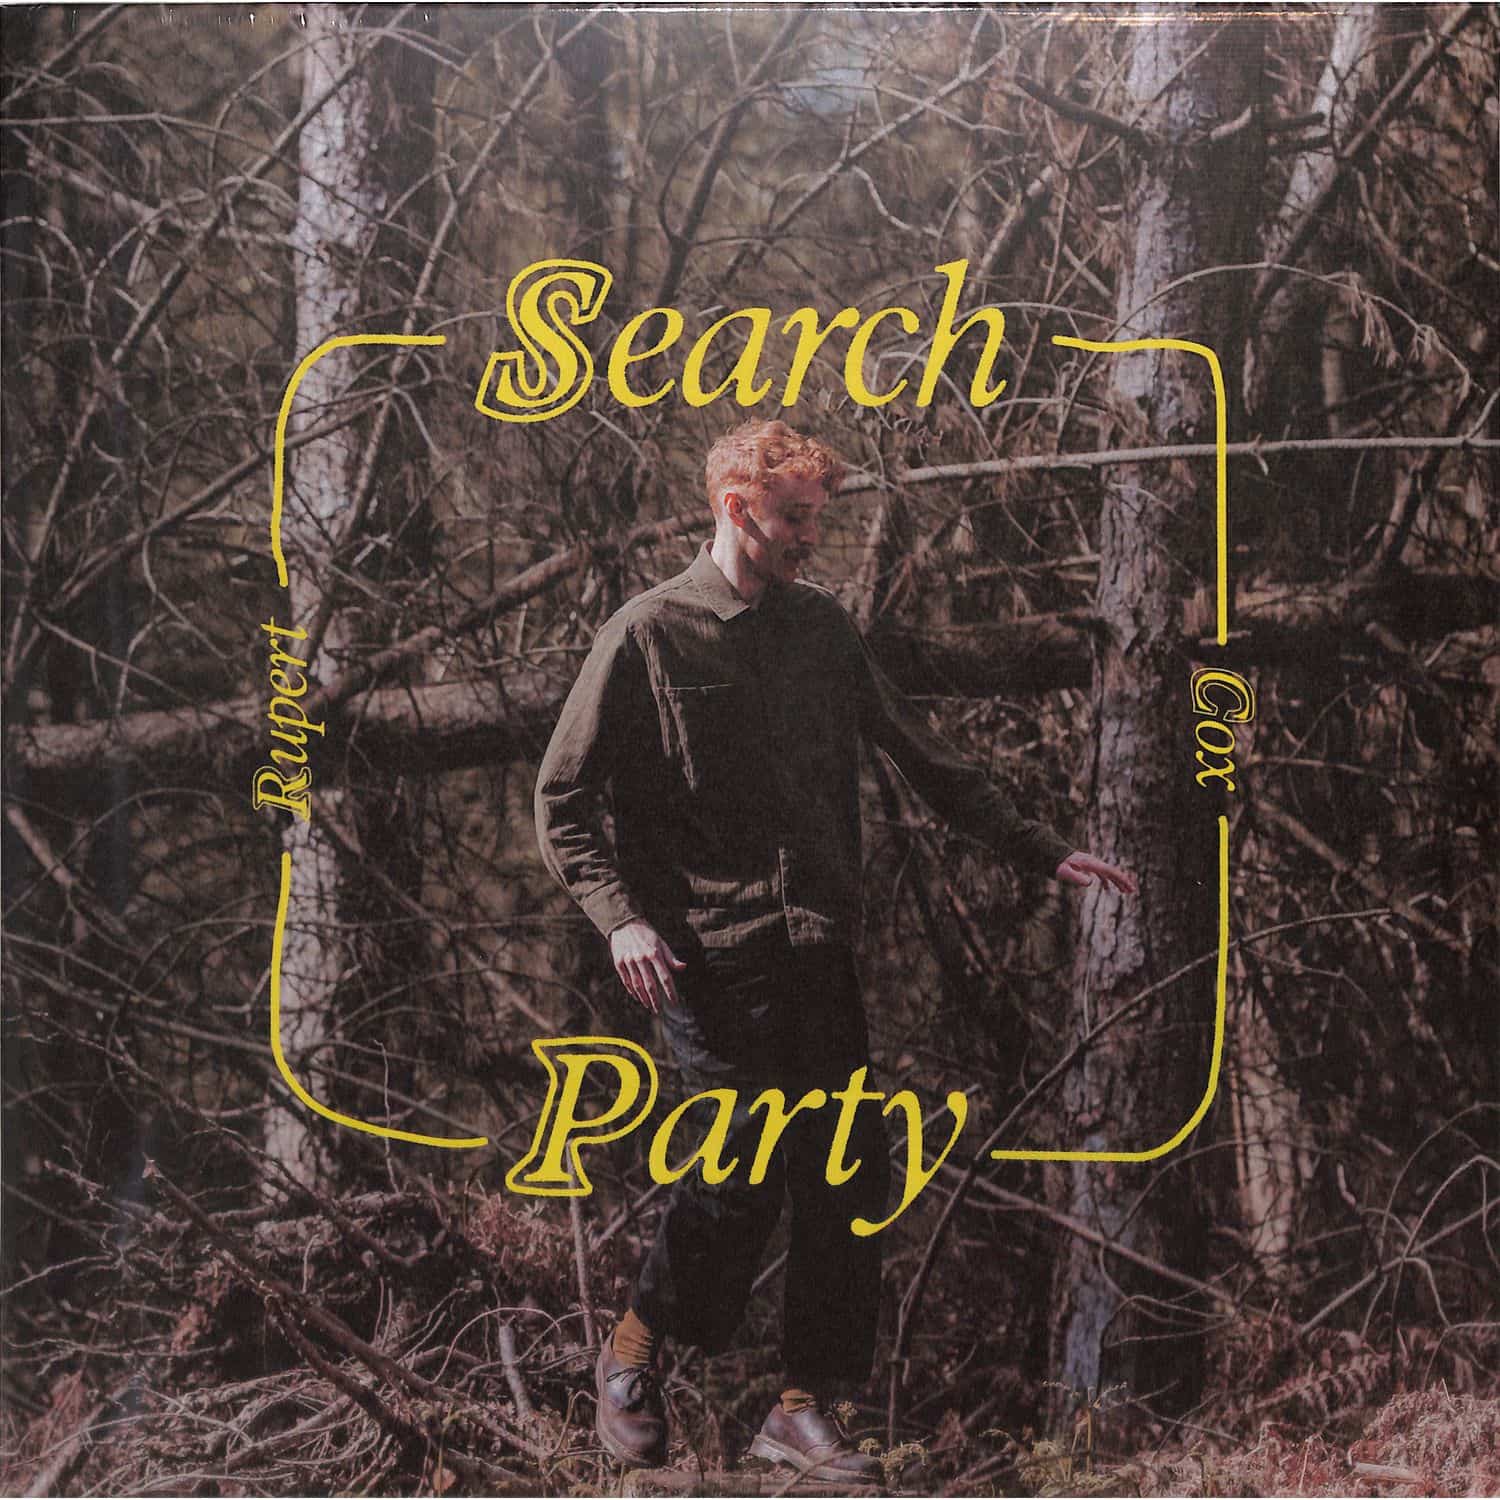 Rupert Cox - Search Party 